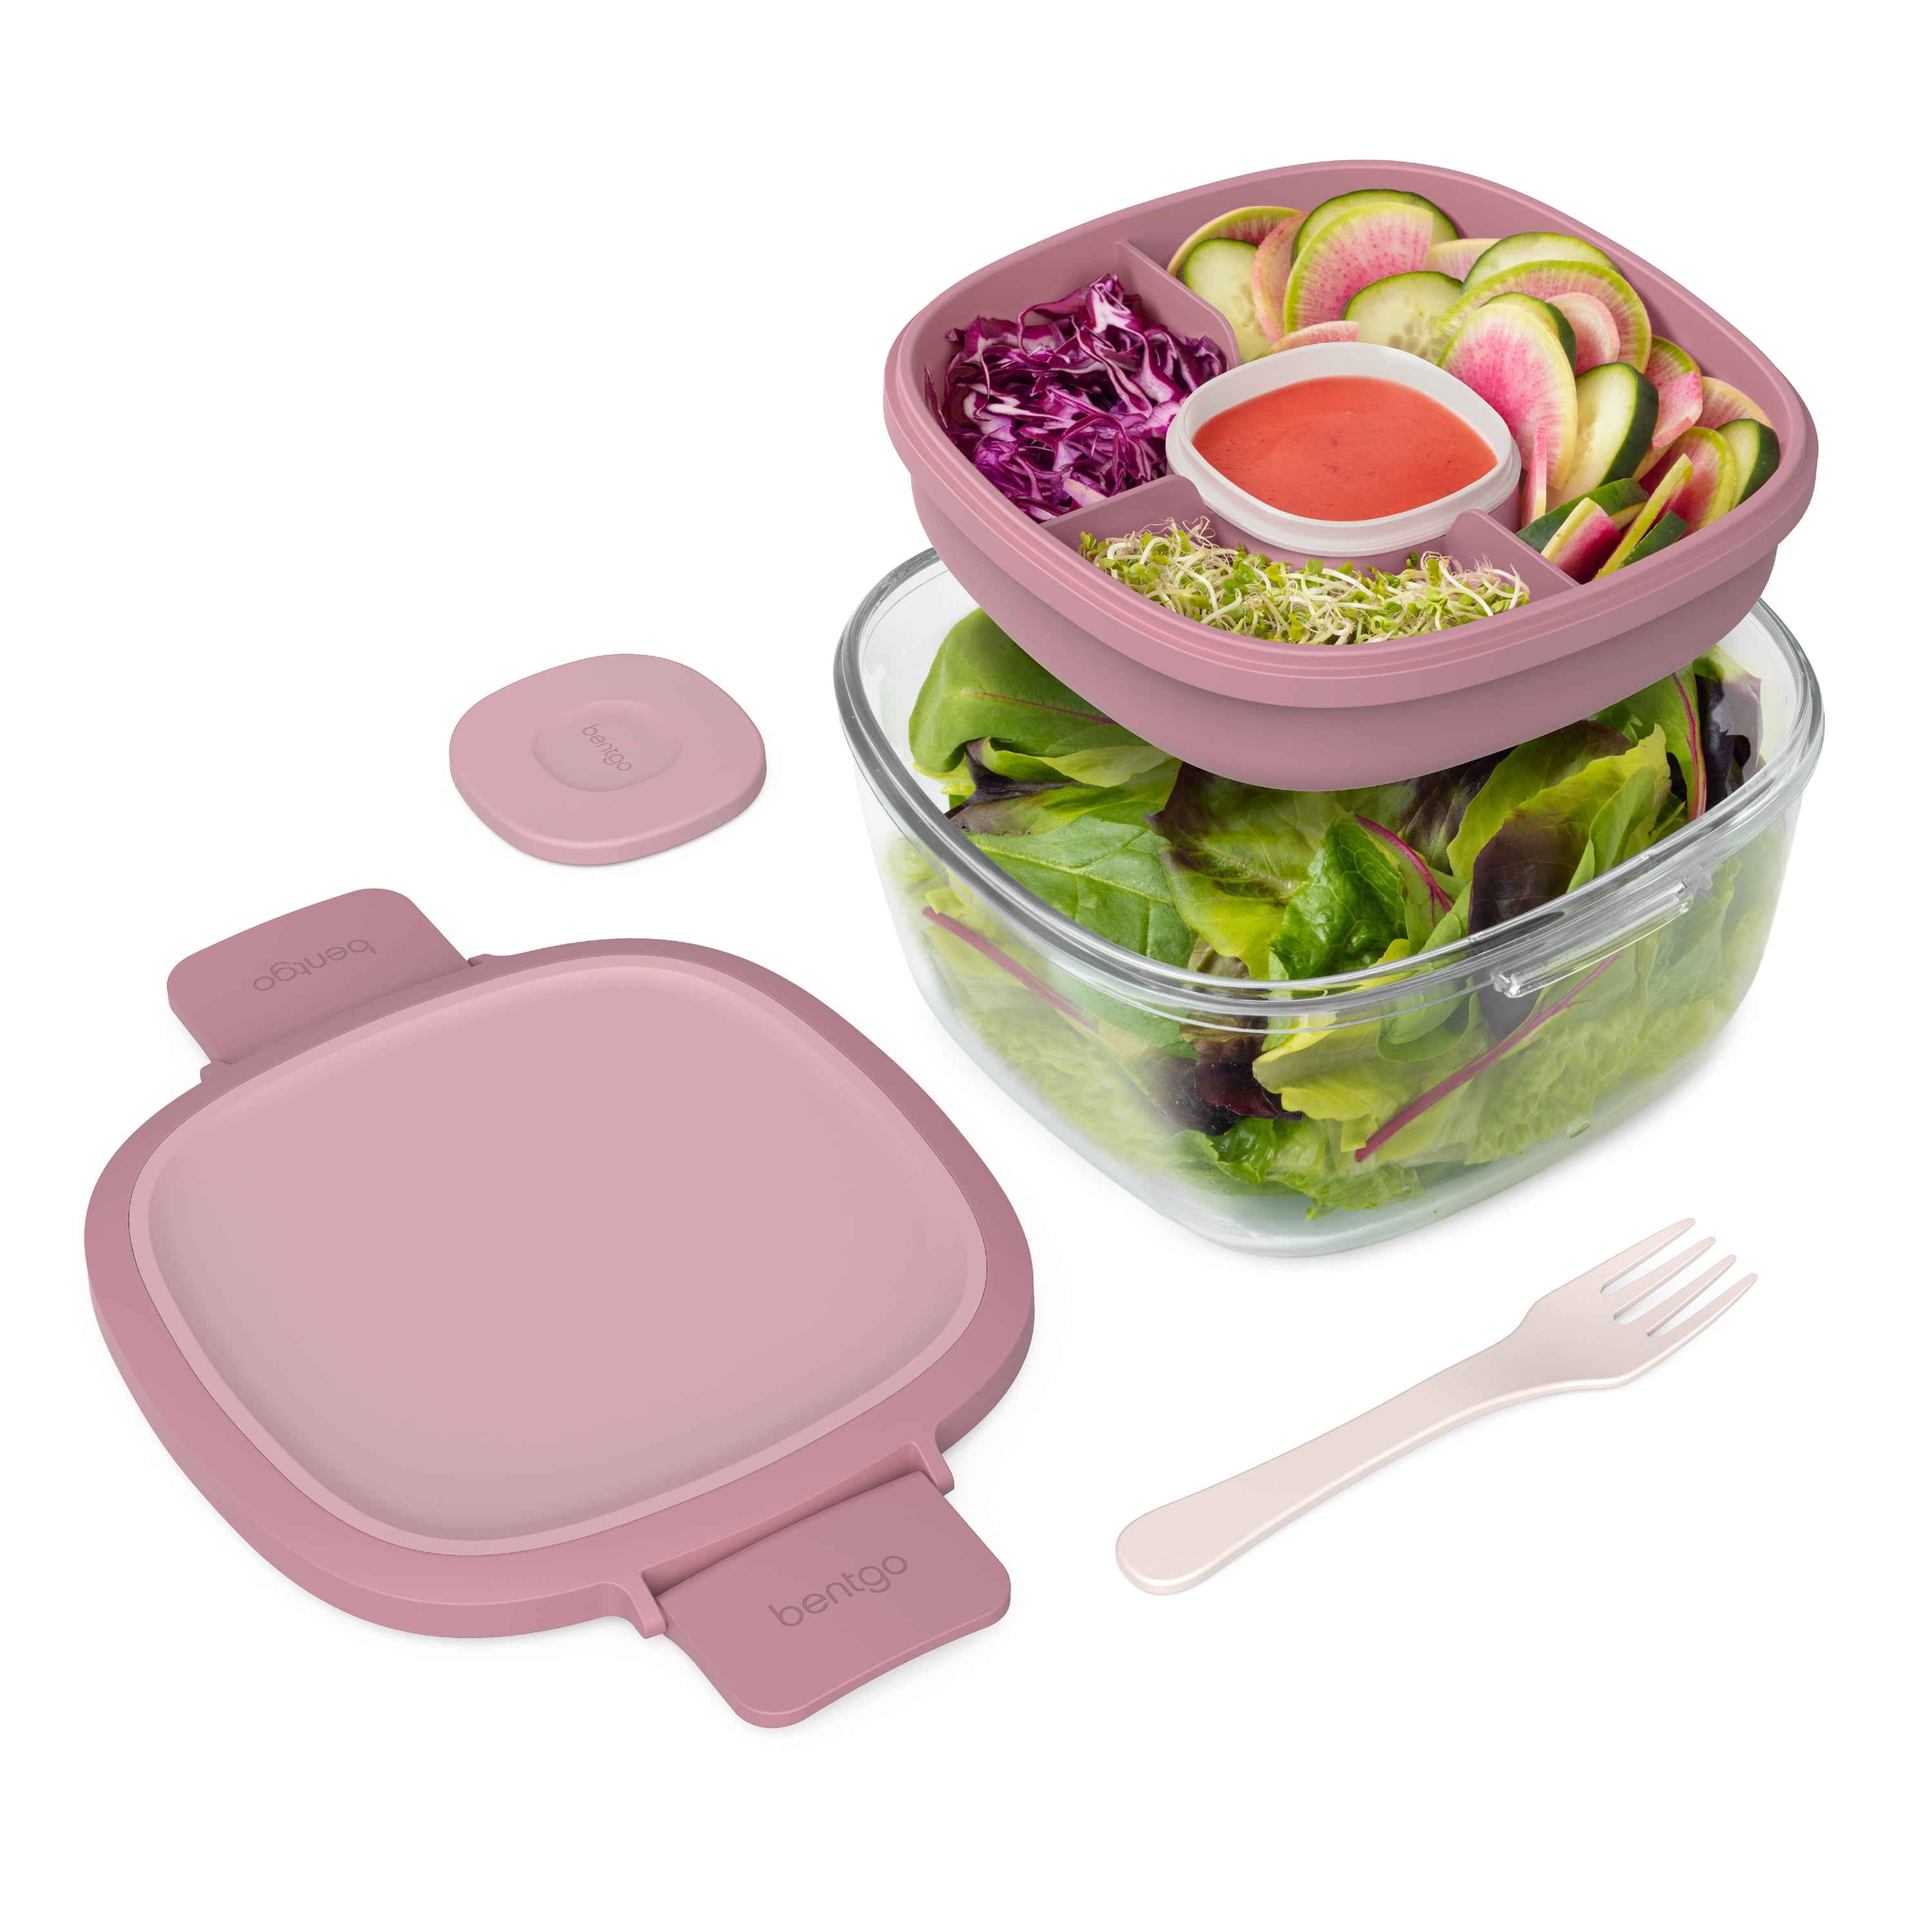 CIVG Salad Lunch Container 2L Large Capacity BPA Free Salad Bento Lunch Box  with 4 Compartments Tray Leak-proof Portable Salad Bowl with Fork for Kids